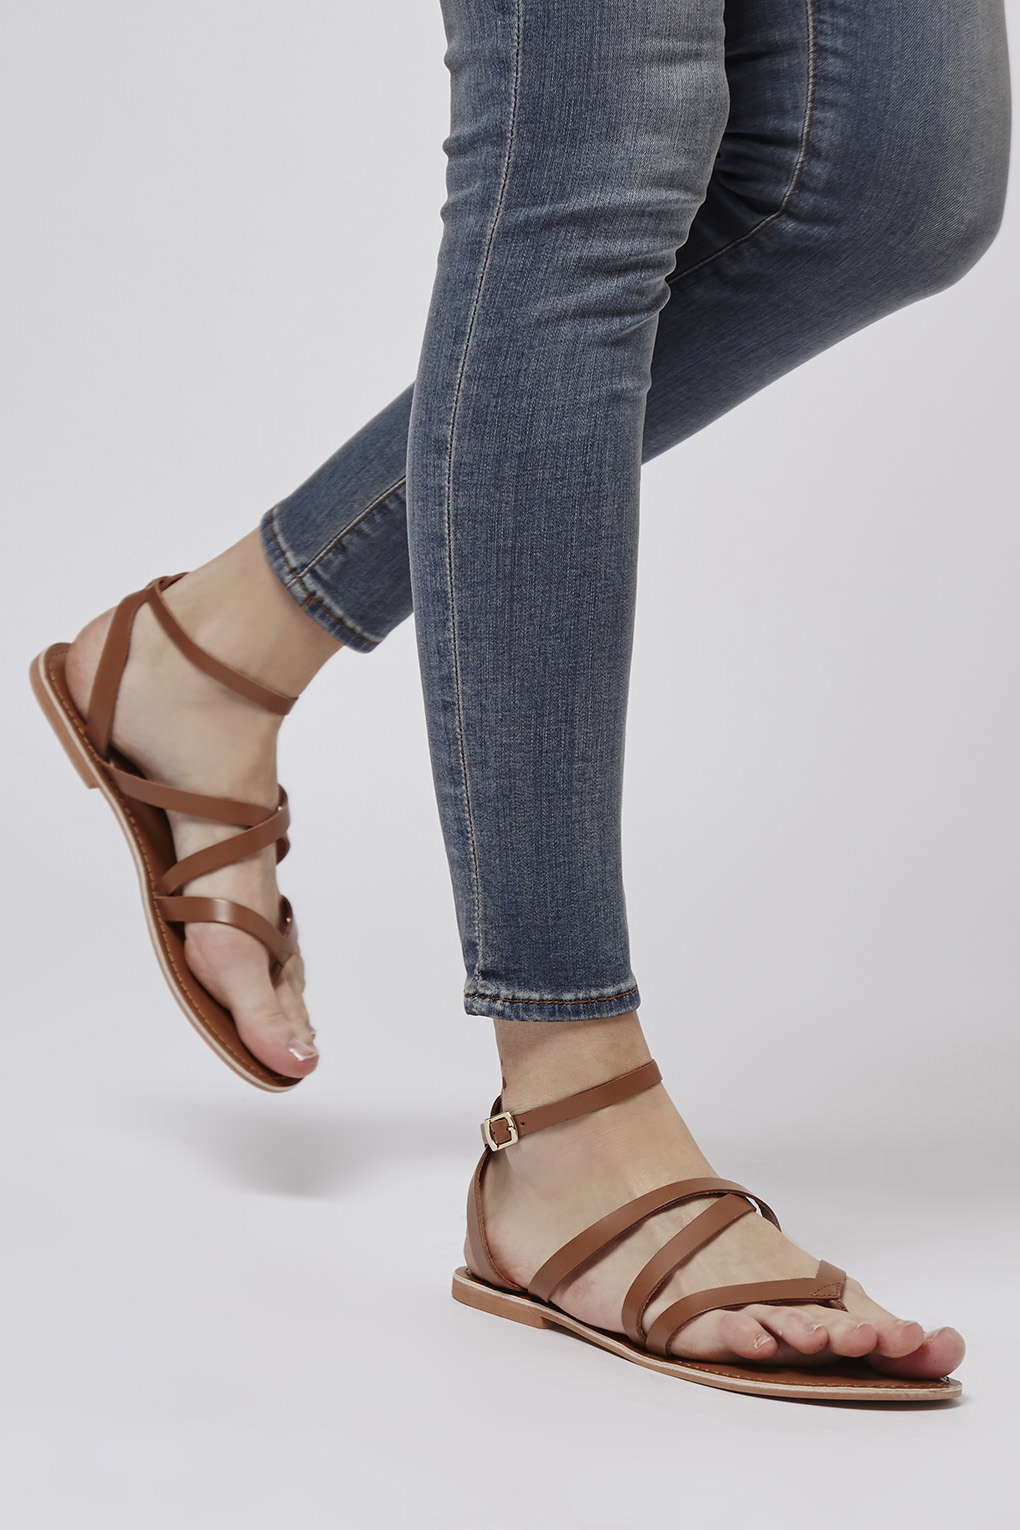 TOPSHOP Hercules Strappy Leather Sandals in Brown - Lyst